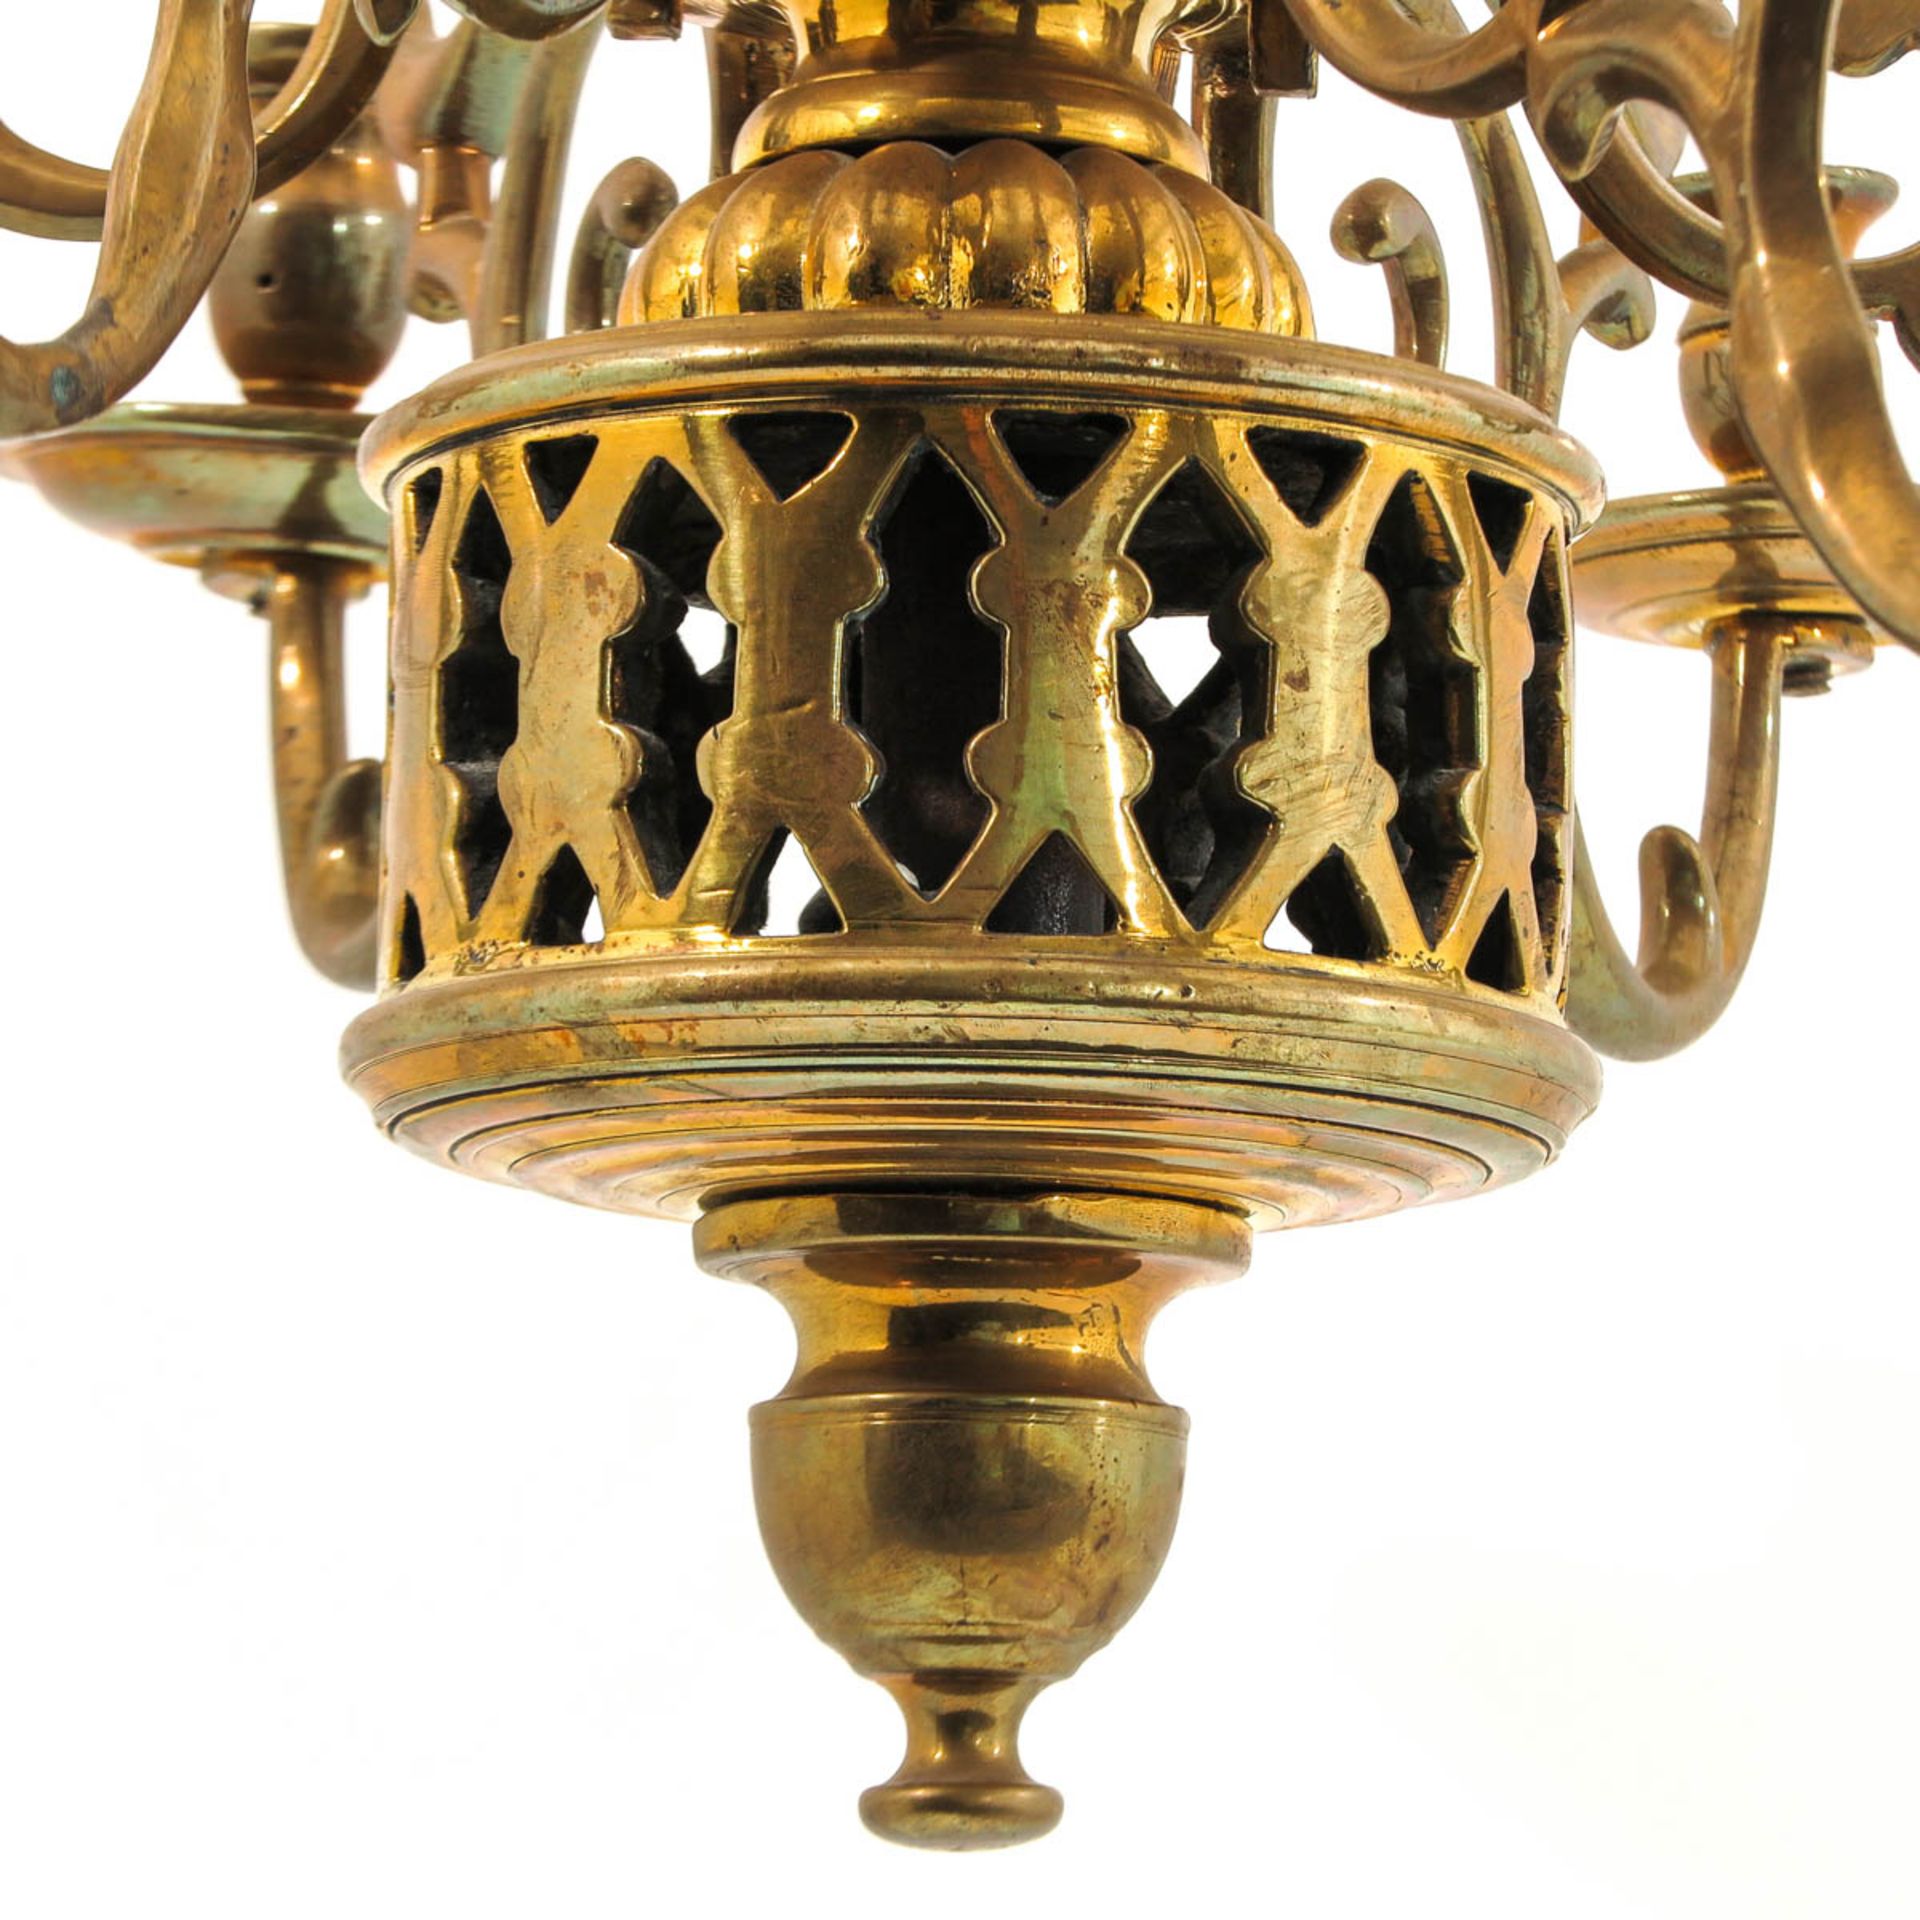 A Brass 18th Century Chandelier - Image 7 of 7